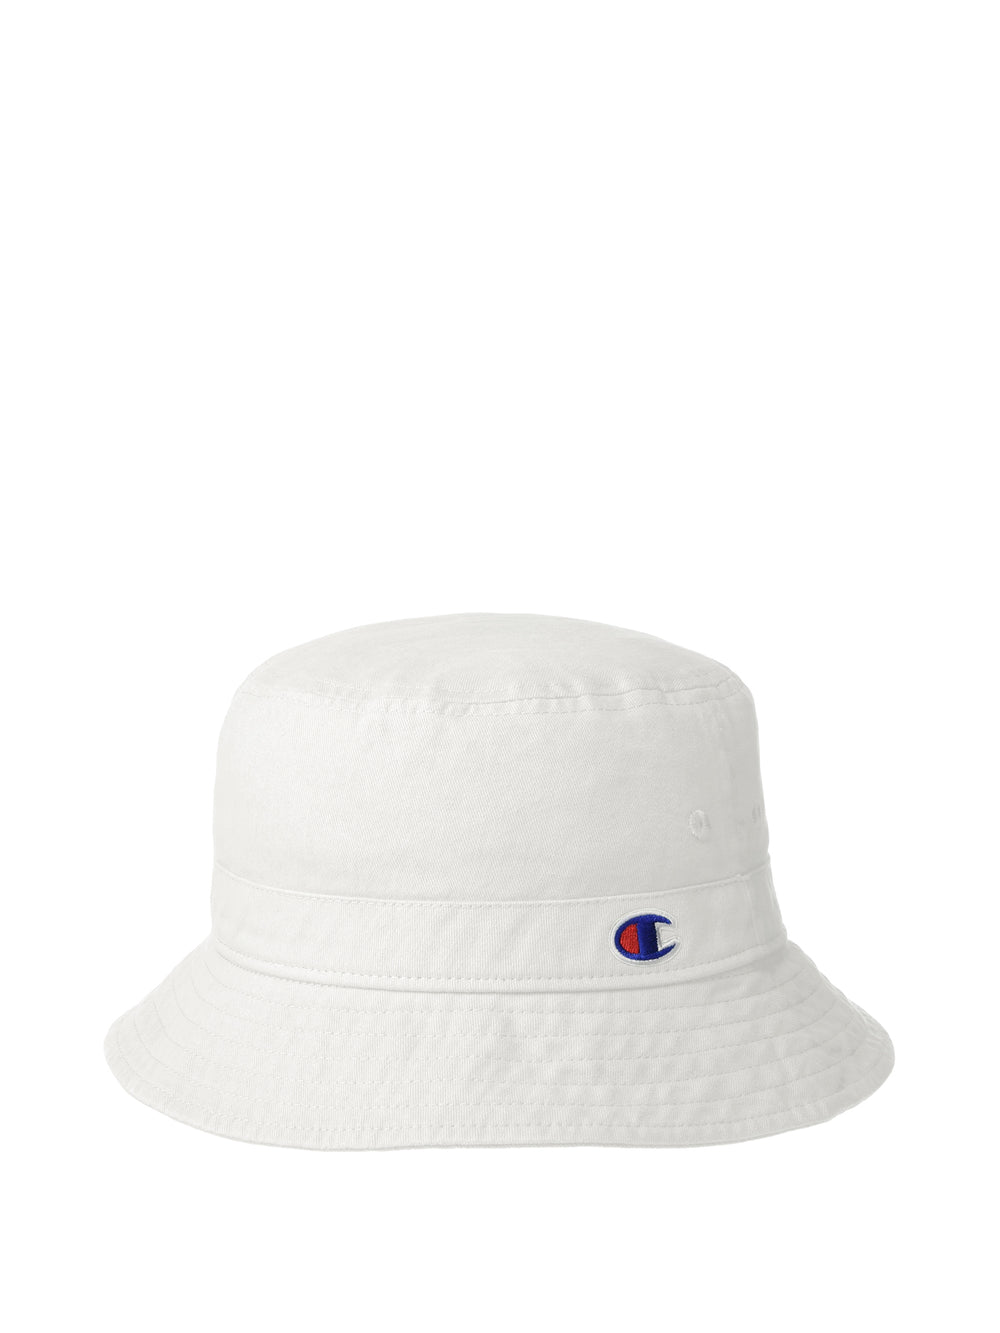 CHAMPION GARMENT WASHED RELAXED BUCKET HAT - CLEARANCE